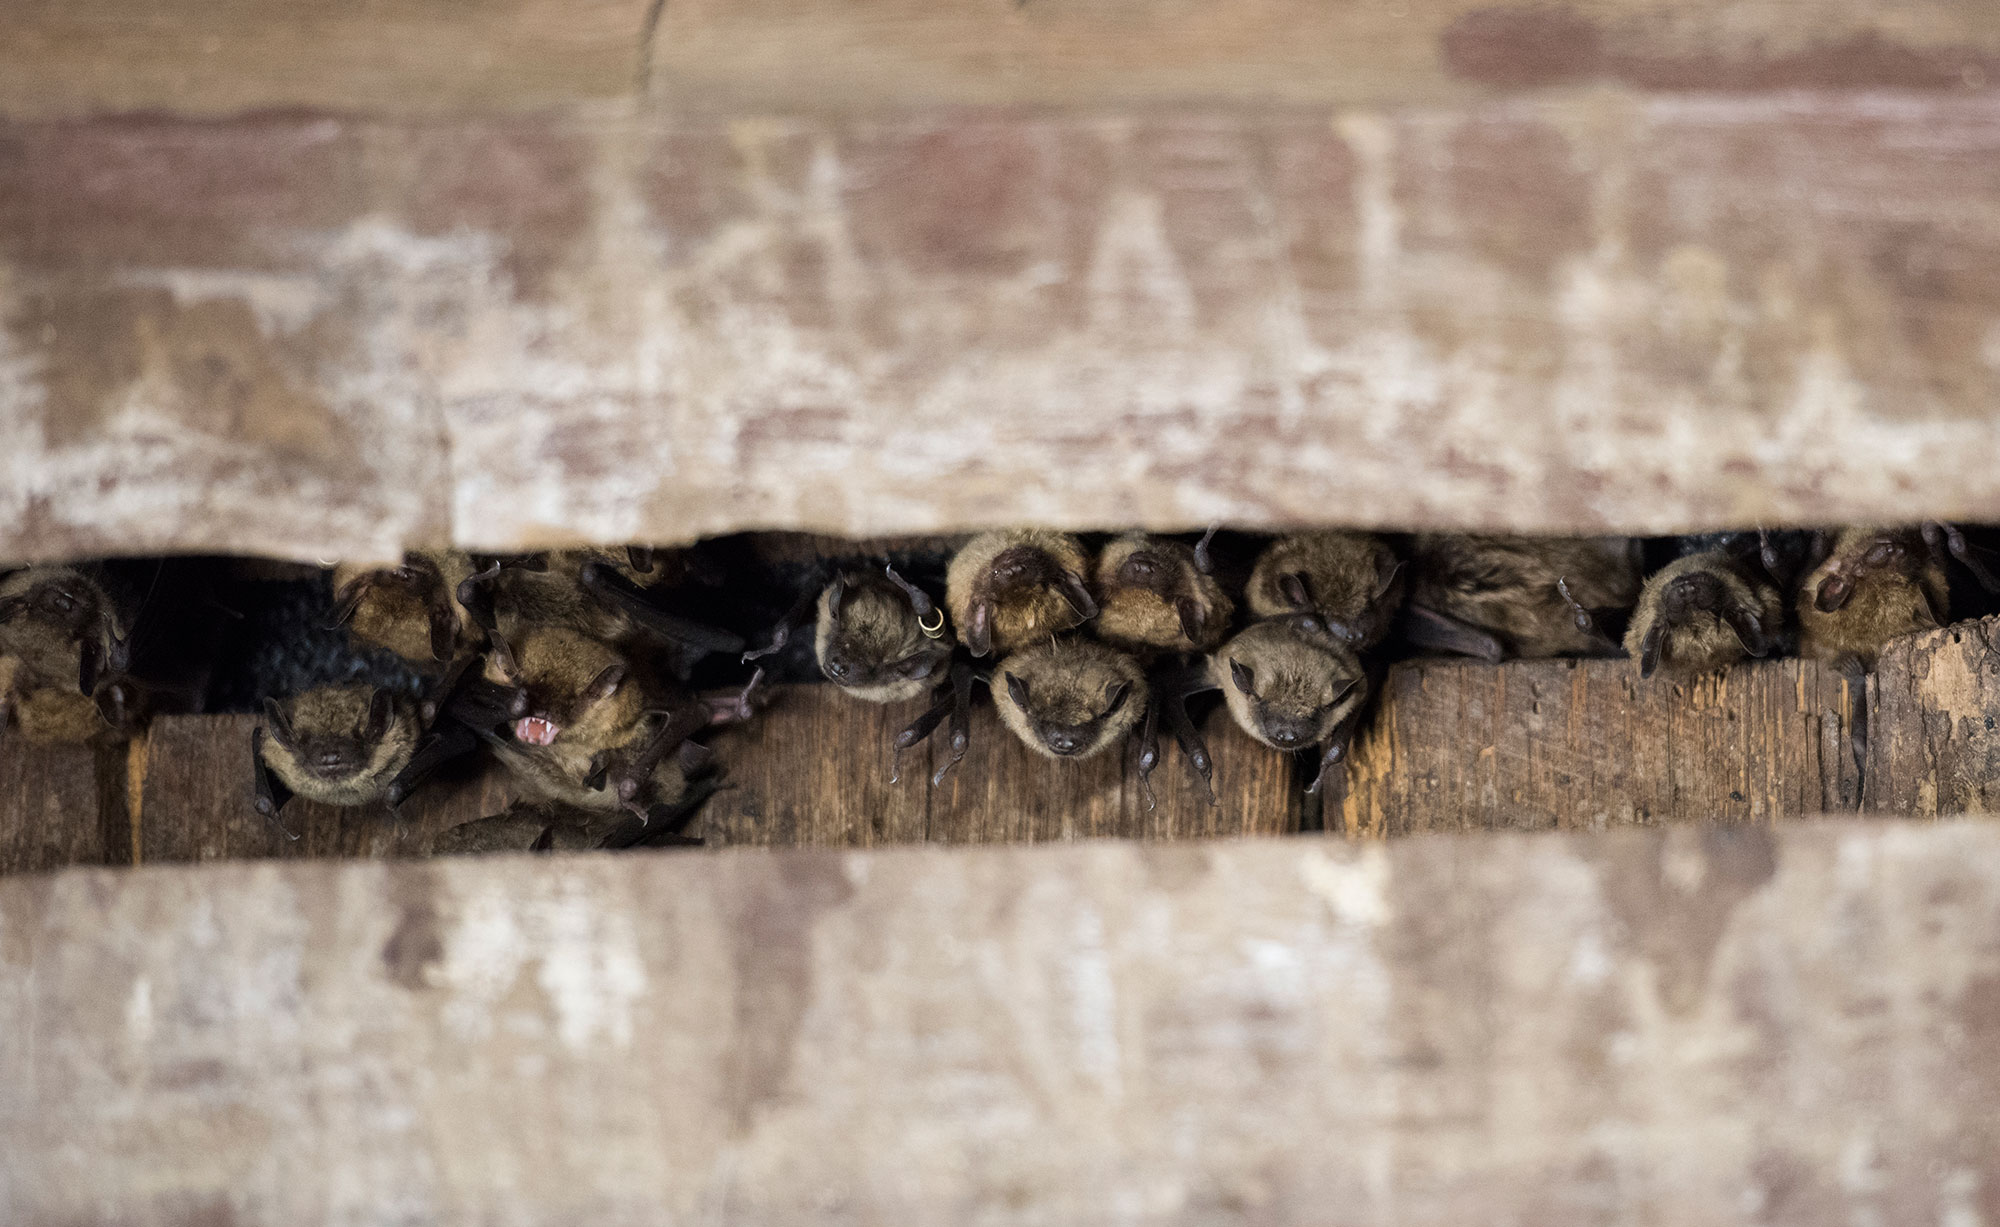 A group of bats in a wooden structure.